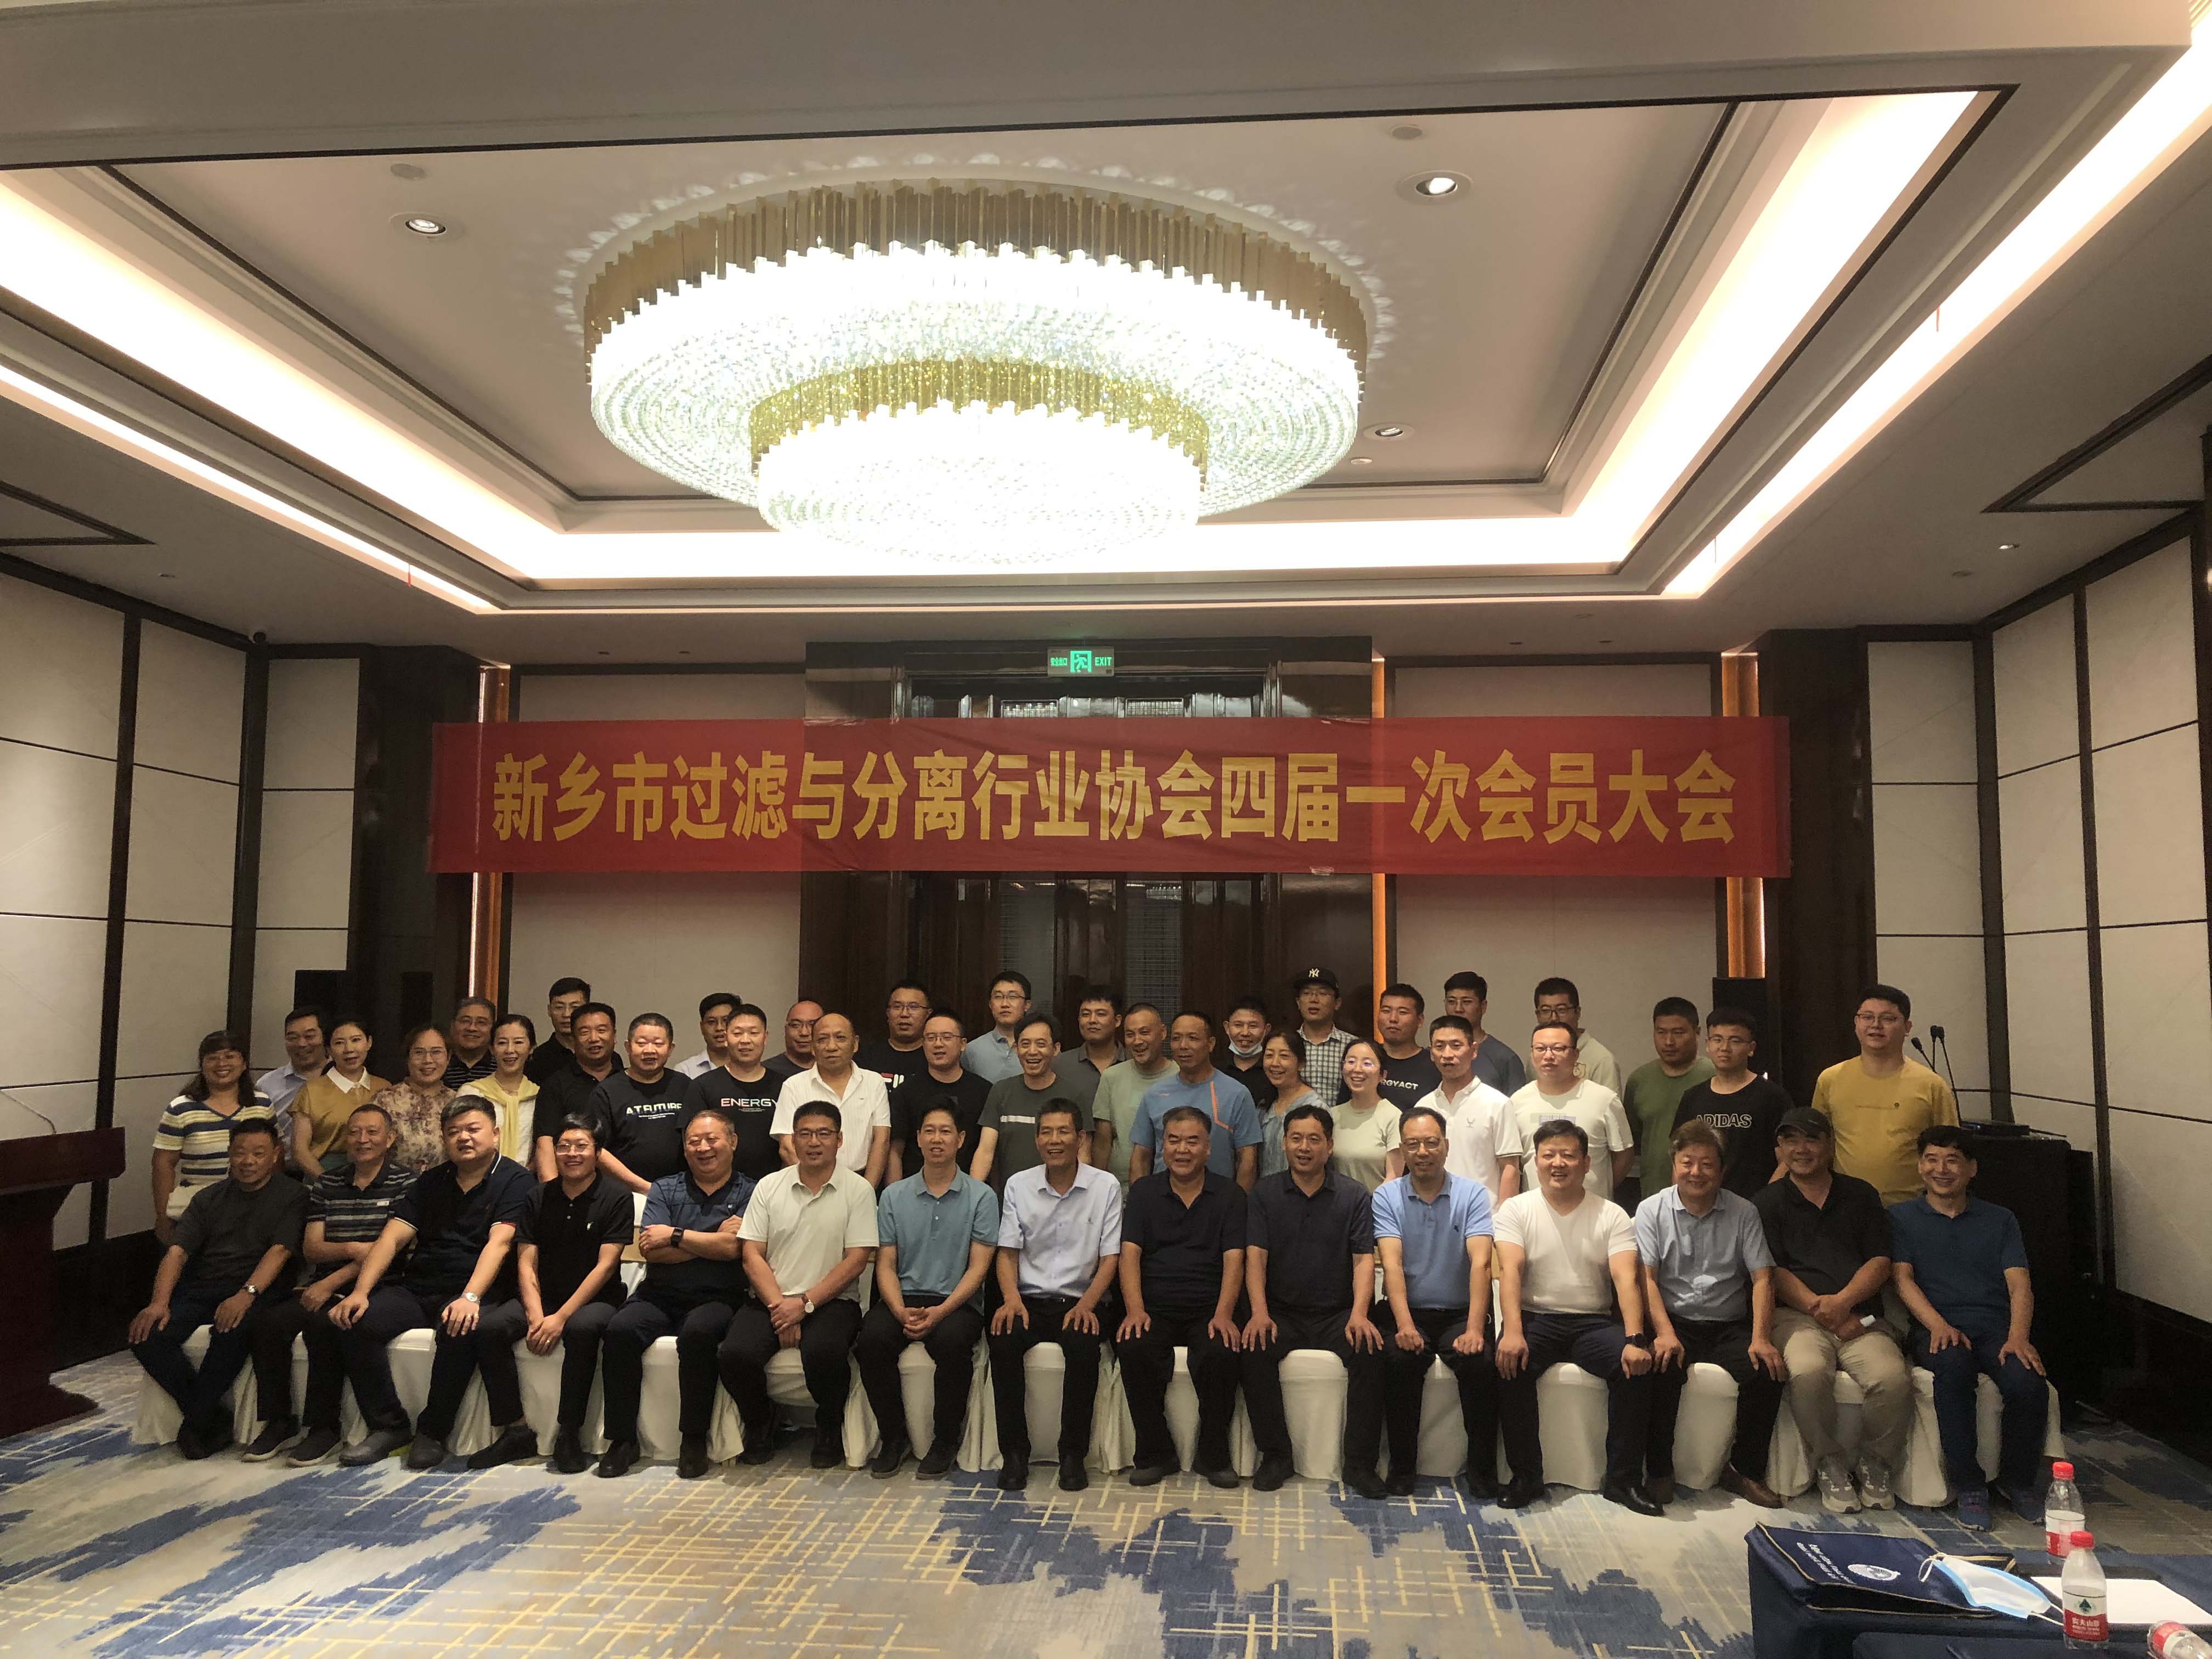 Xinli Filters Wishes The First Member Meeting Of The Fourth Session Of the Filtration Association a Complete Success